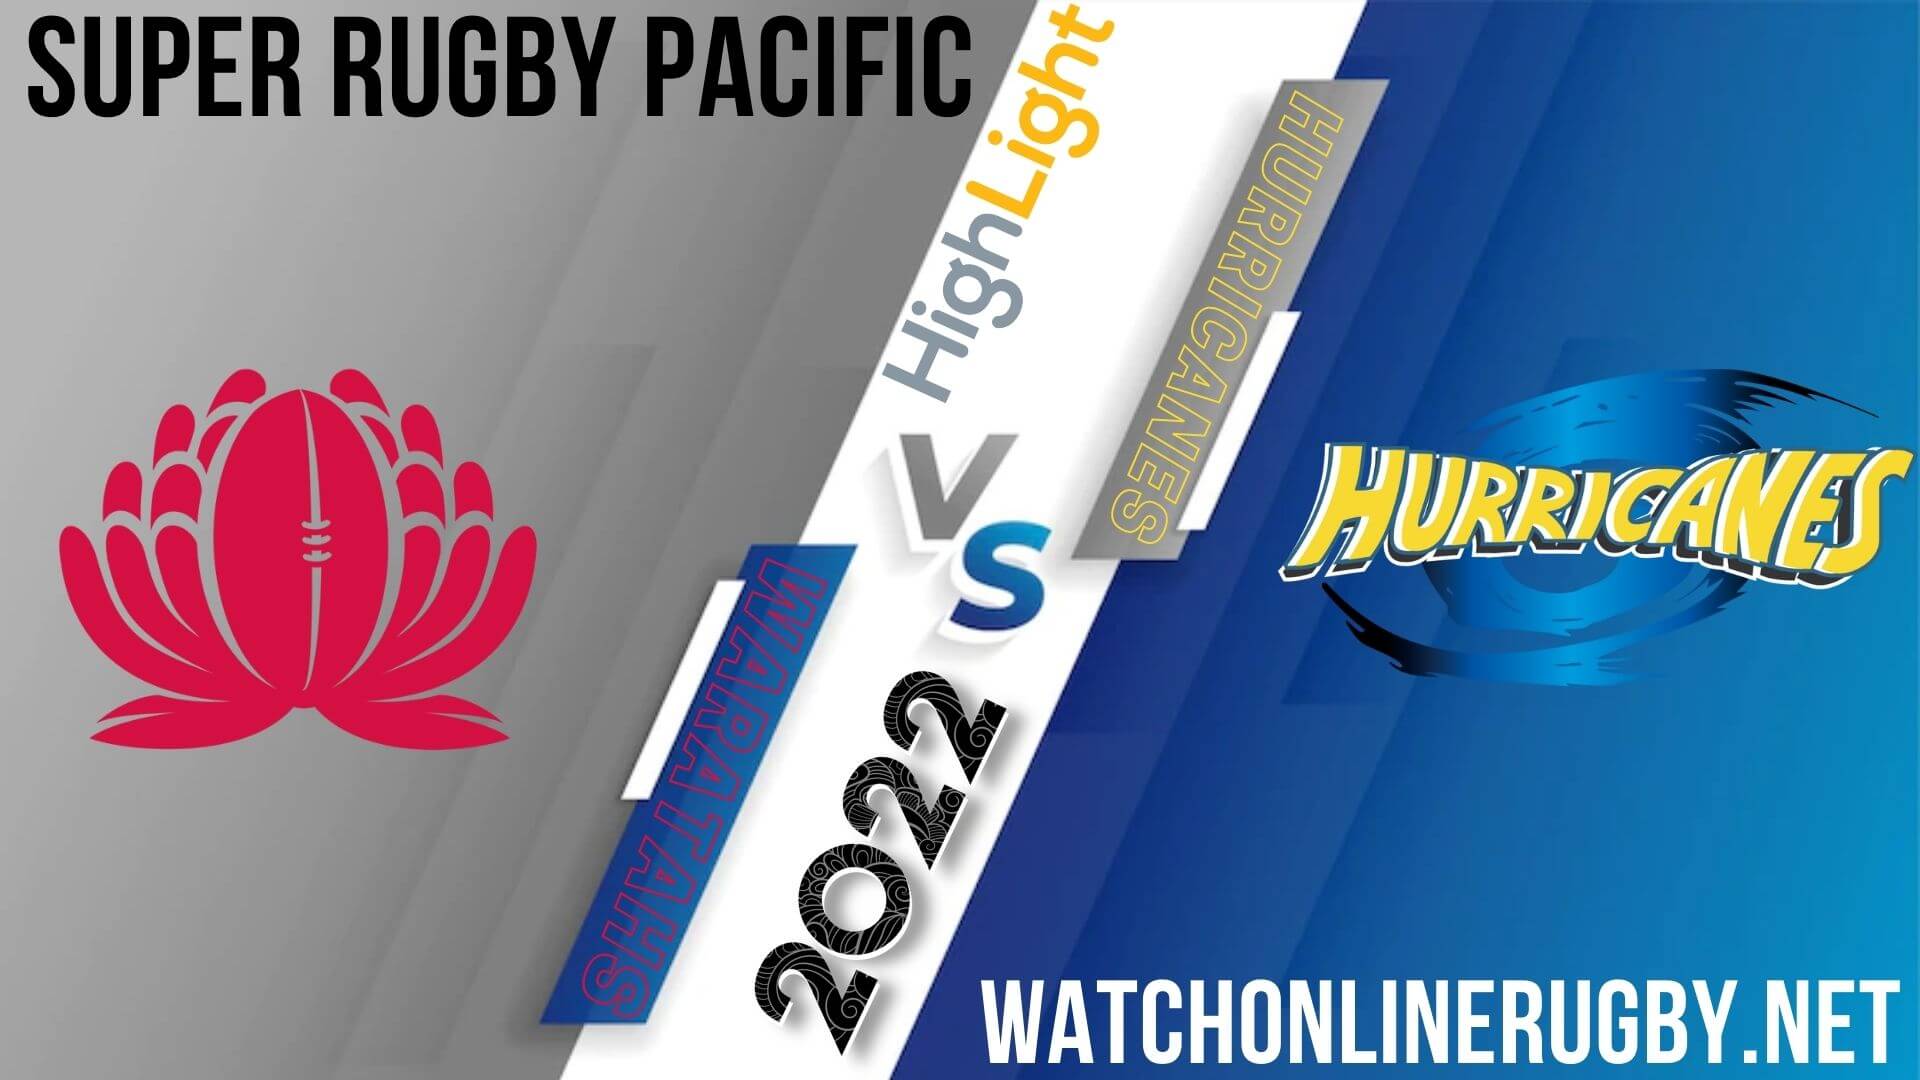 NSW Waratahs Vs Hurricanes Super Rugby Pacific 2022 RD 13